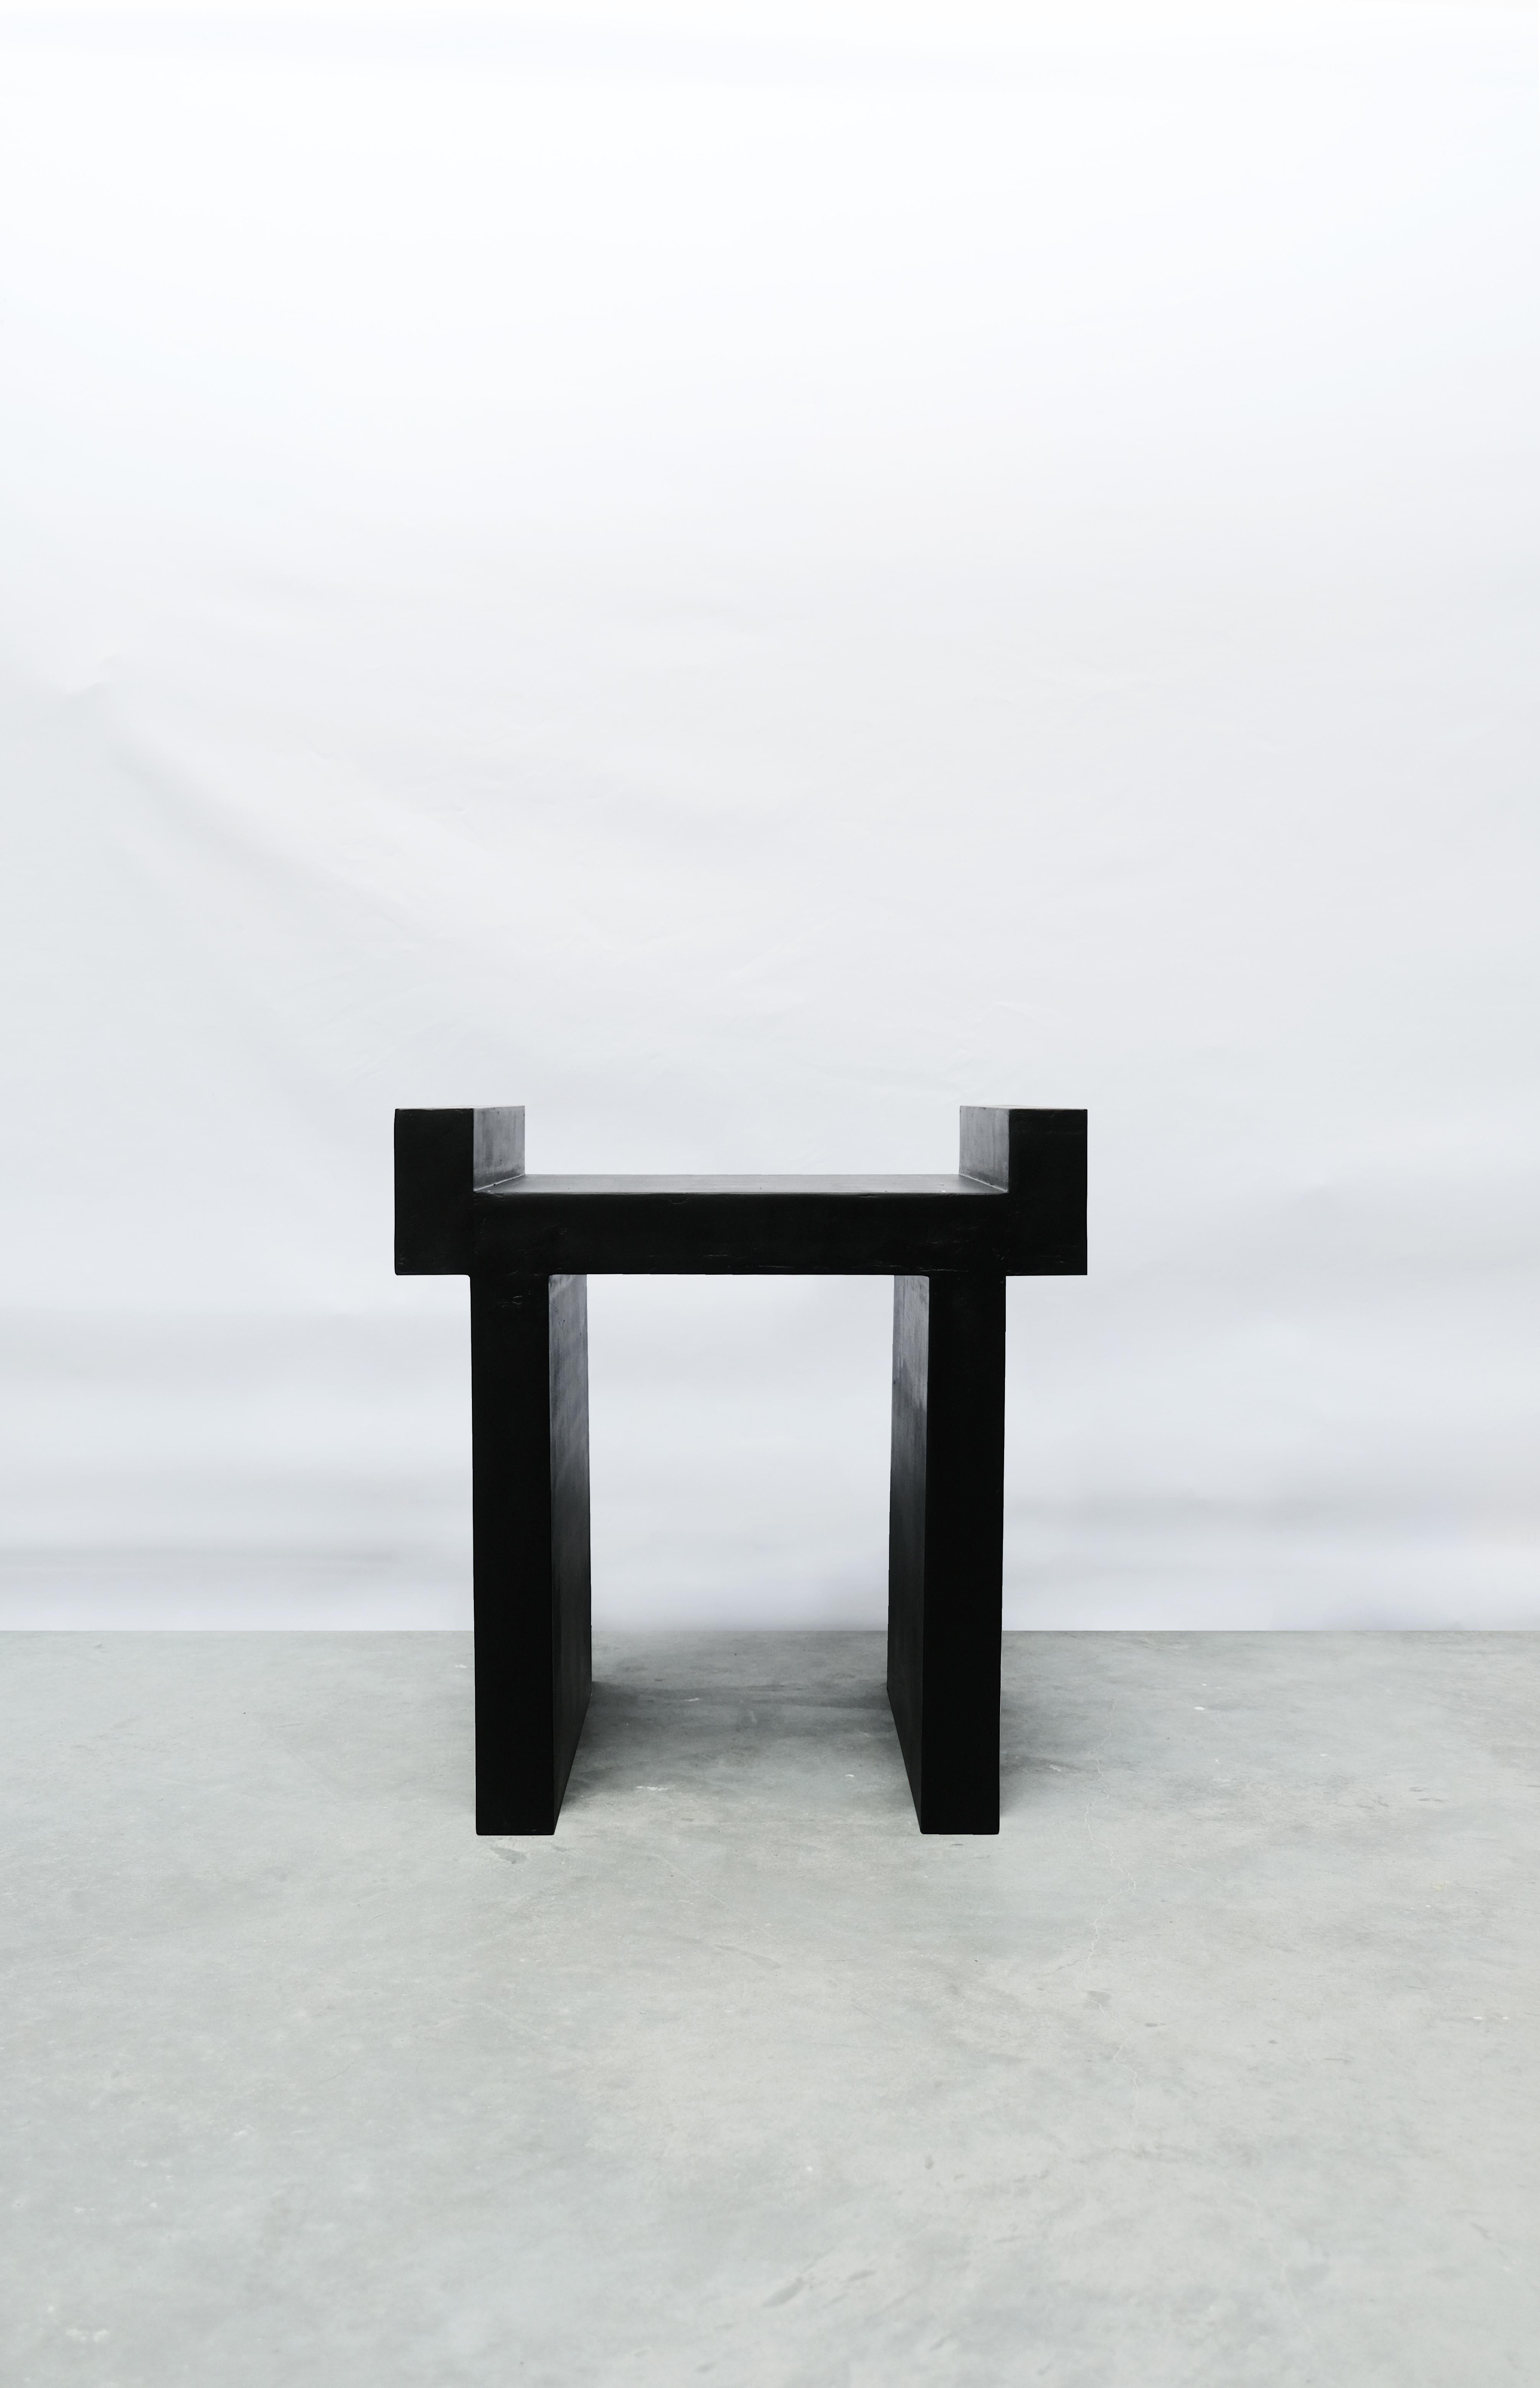 Ares by Atelier Ledure
Dimensions: W 36 x L 52 x 52 H 
Materials: Handwaxed plywood
Available Finishes: Charcoal Stained


Atelier Ledure is the joint project of designers and makers, father and son, Filip and Victor Ledure.

Victor Ledure (1990) is